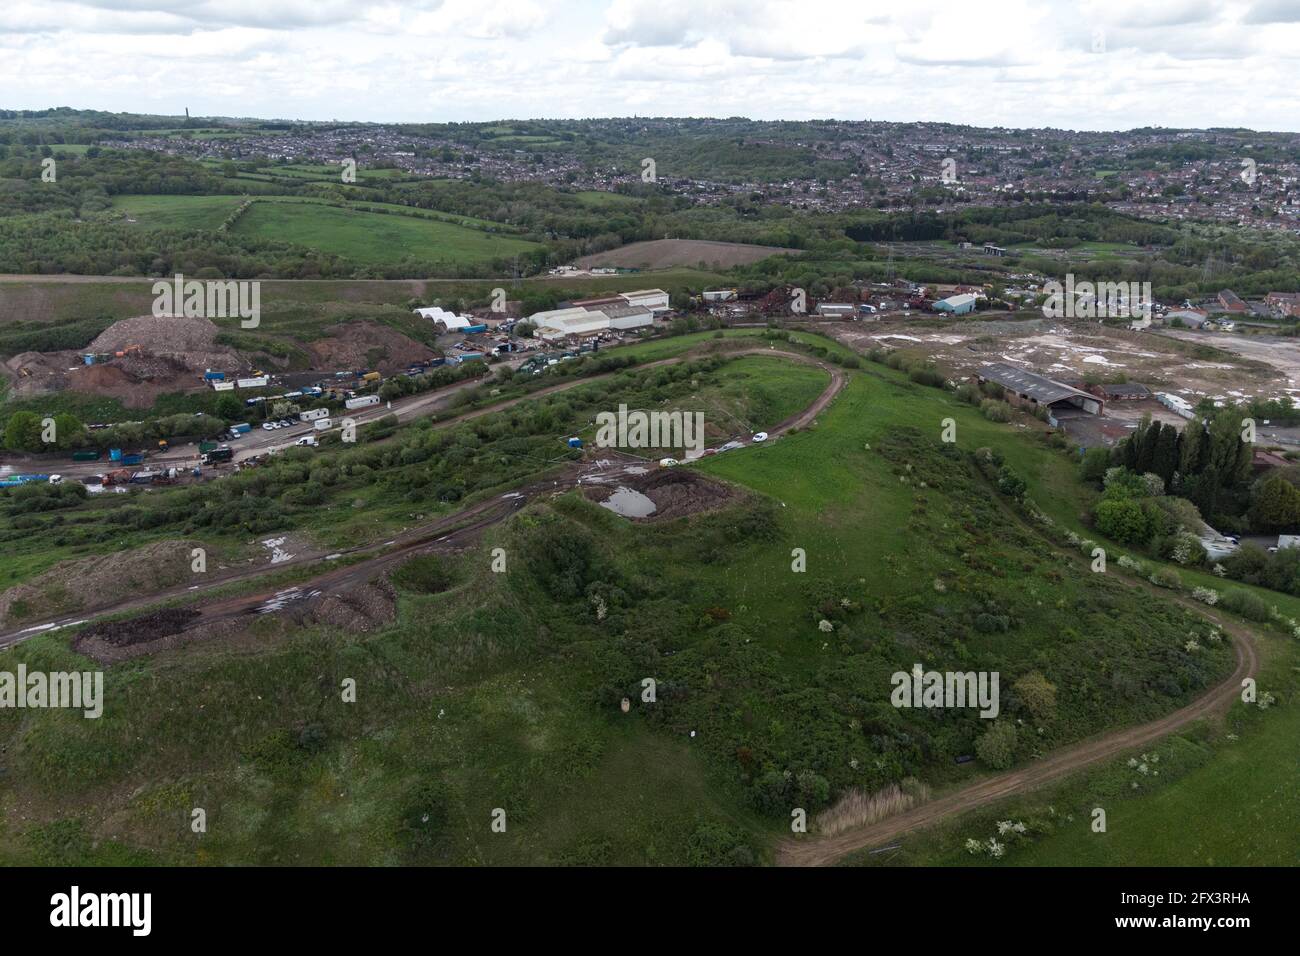 Kingswinford, UK. 25th May, 2021. Aerial views of Himley Quarry Landfill where a poice scene has been set up after a human bone was found. A blue tent is visible along with police vehicles and officers. West Midlands Police are searching the site, on top of a landfill mound after the grim discovery. Pic by Credit: Katie Stewart/Alamy Live News Stock Photo